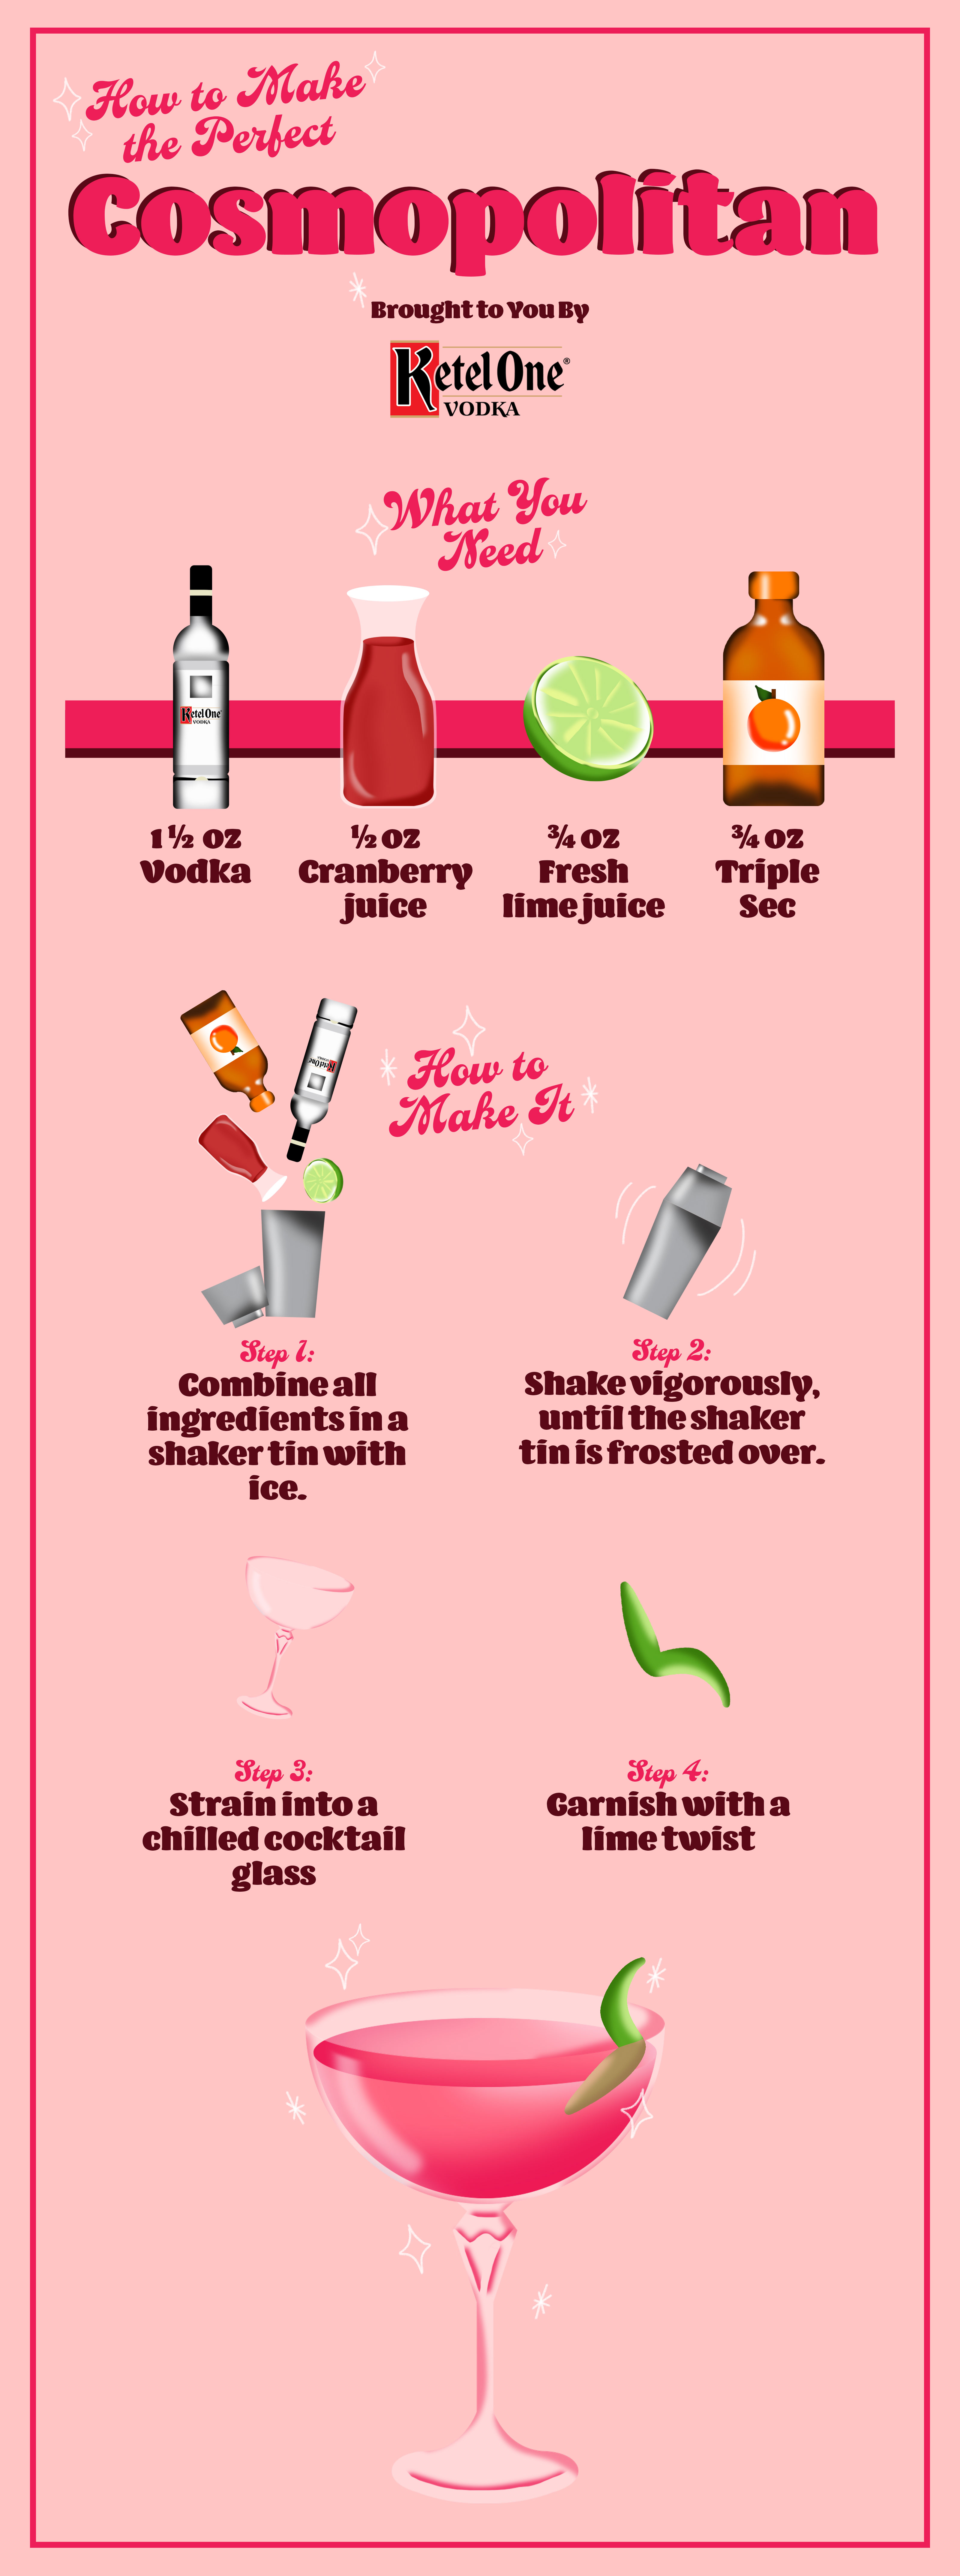 How to Make the Best Cosmopolitan [Infographic] | VinePair